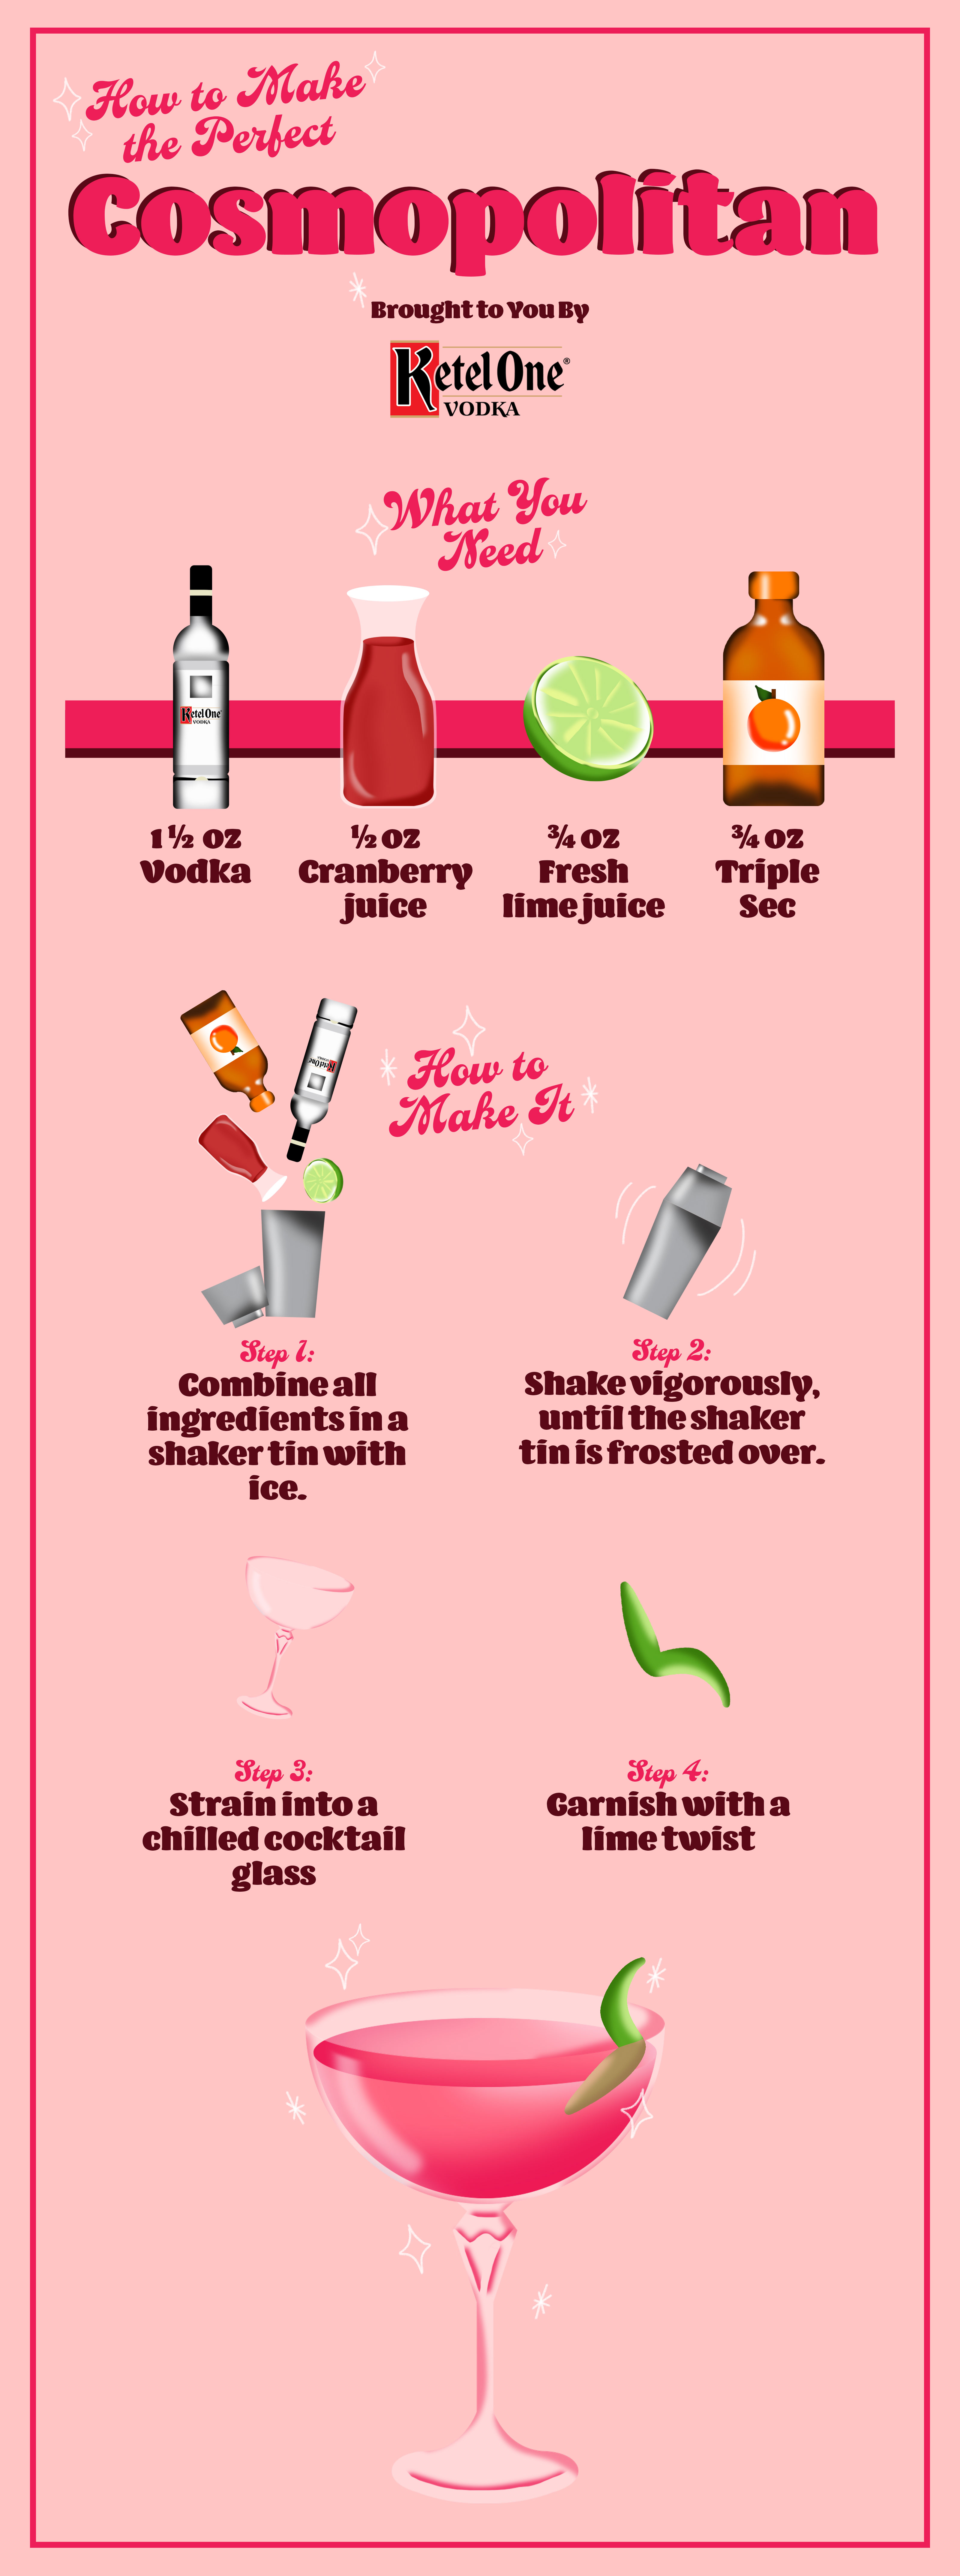 How to Make the Best Cosmopolitan [Infographic] | VinePair